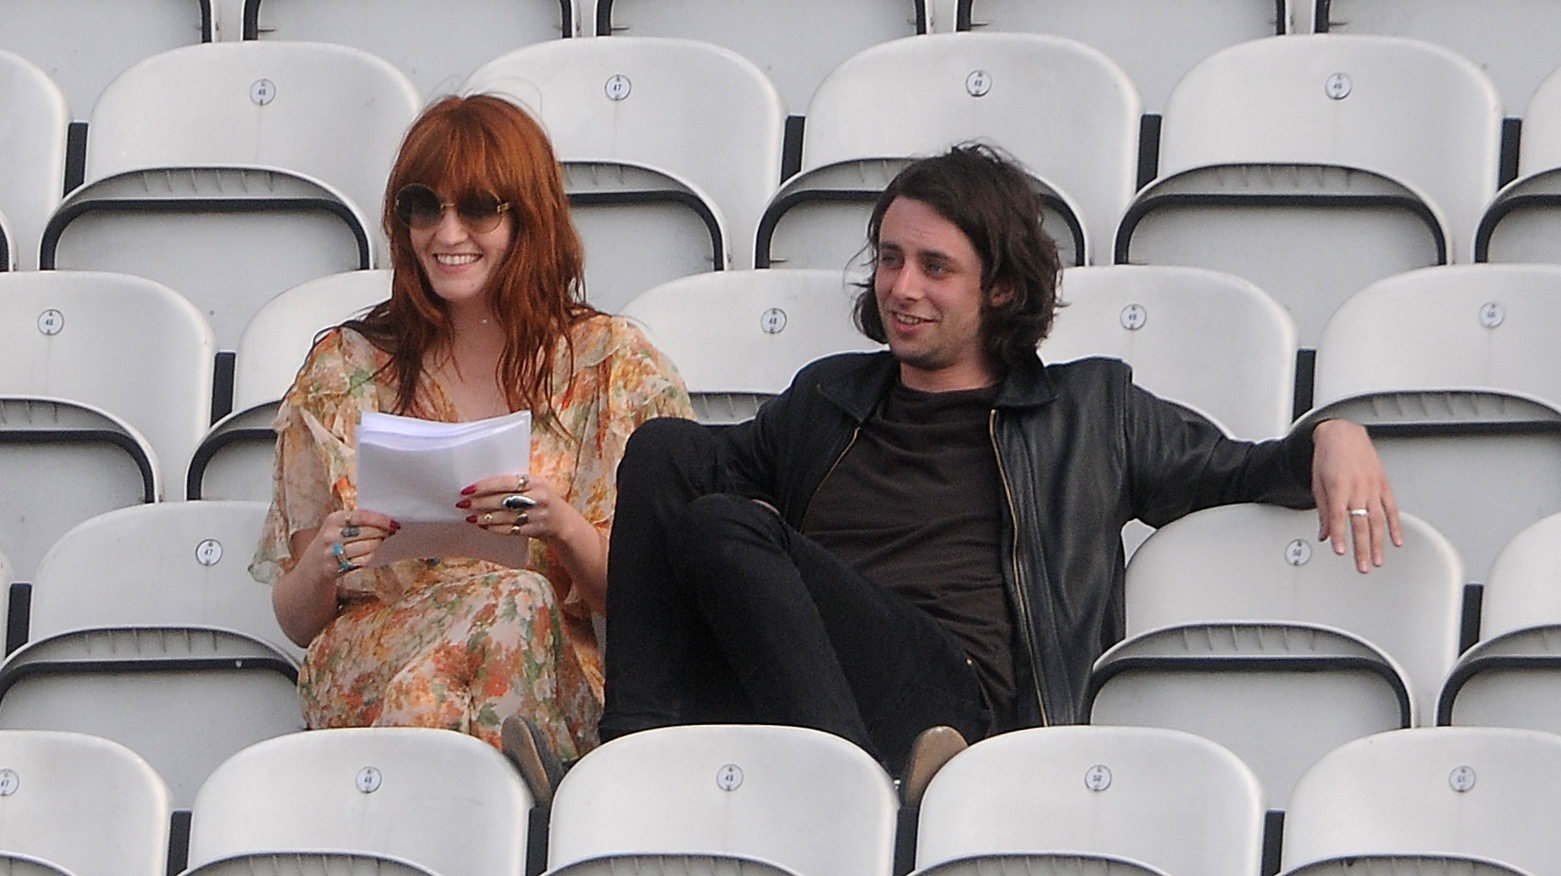 Florence Welch and Felix White at the cricket game between Surrey and Sussex on April 25, 2013, in London | Source: Getty Images